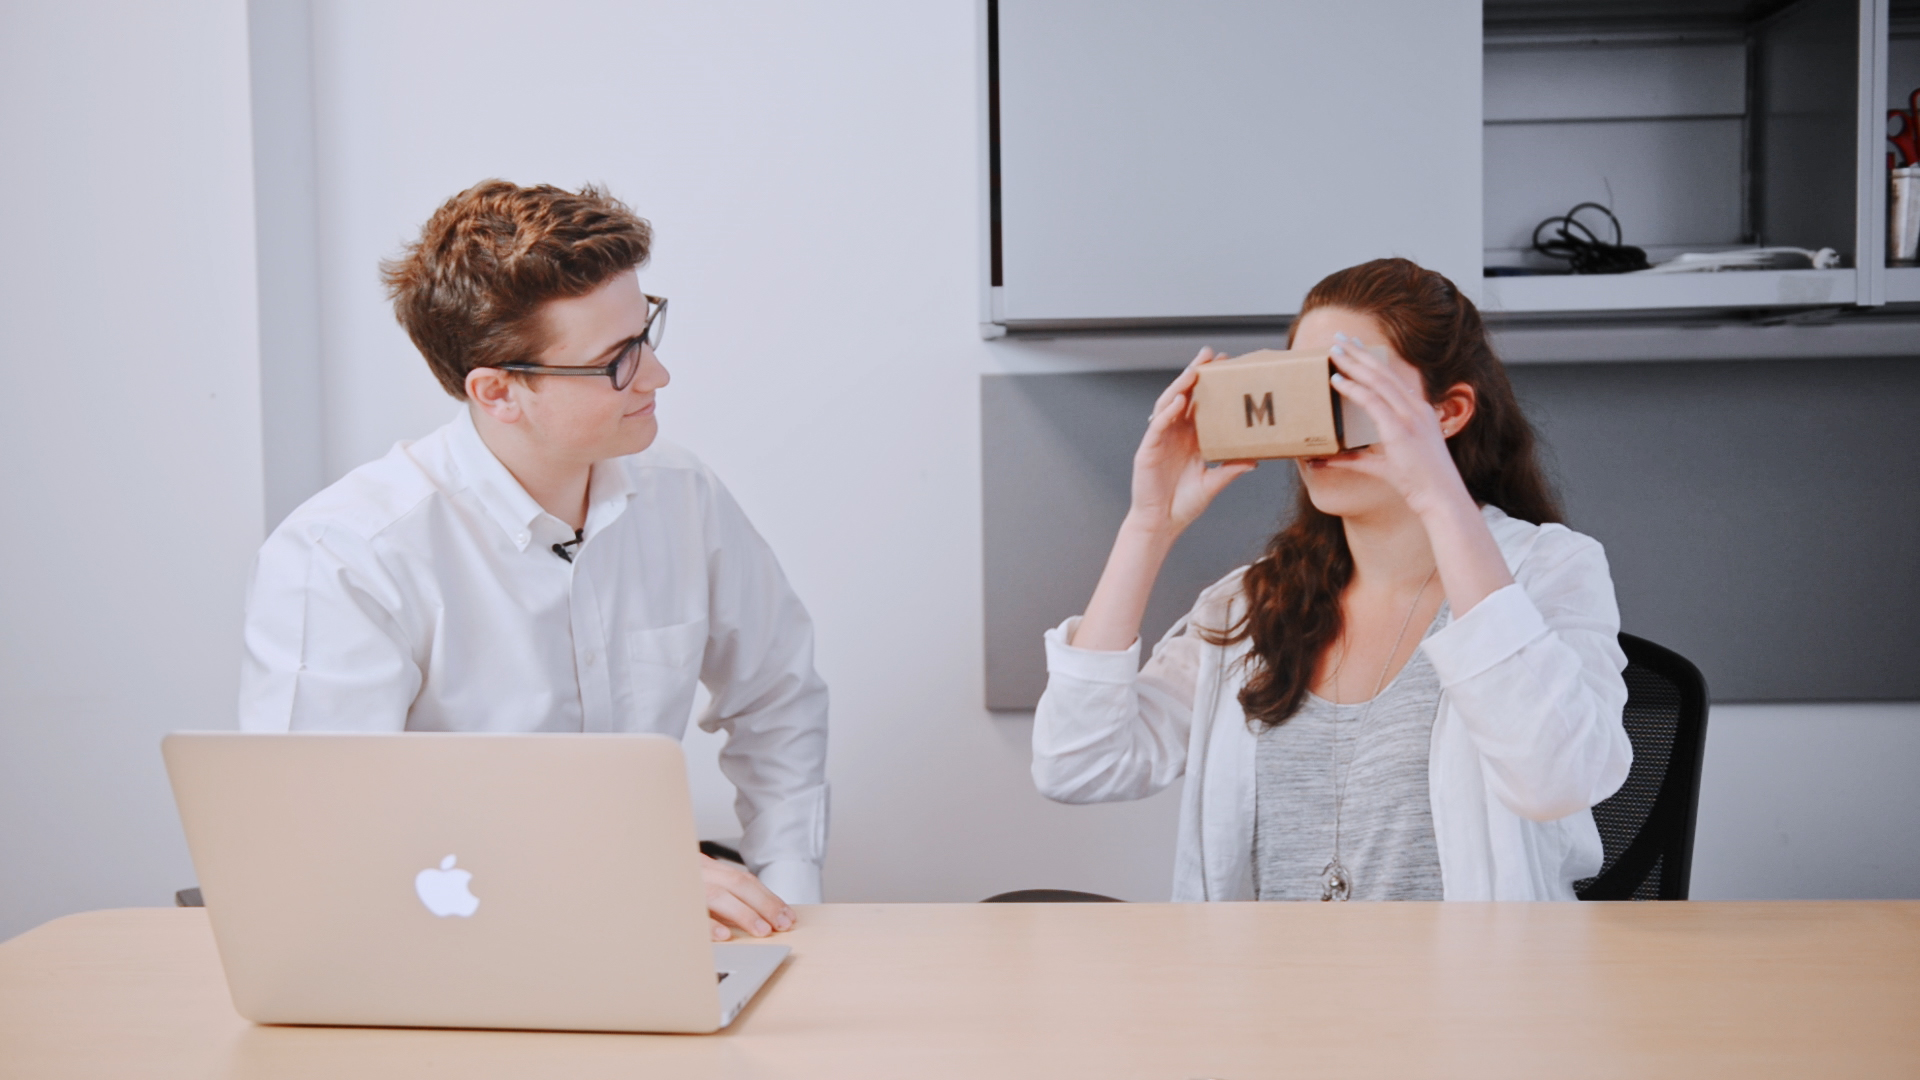 Impress and involve clients in the architectural design process with virtual reality